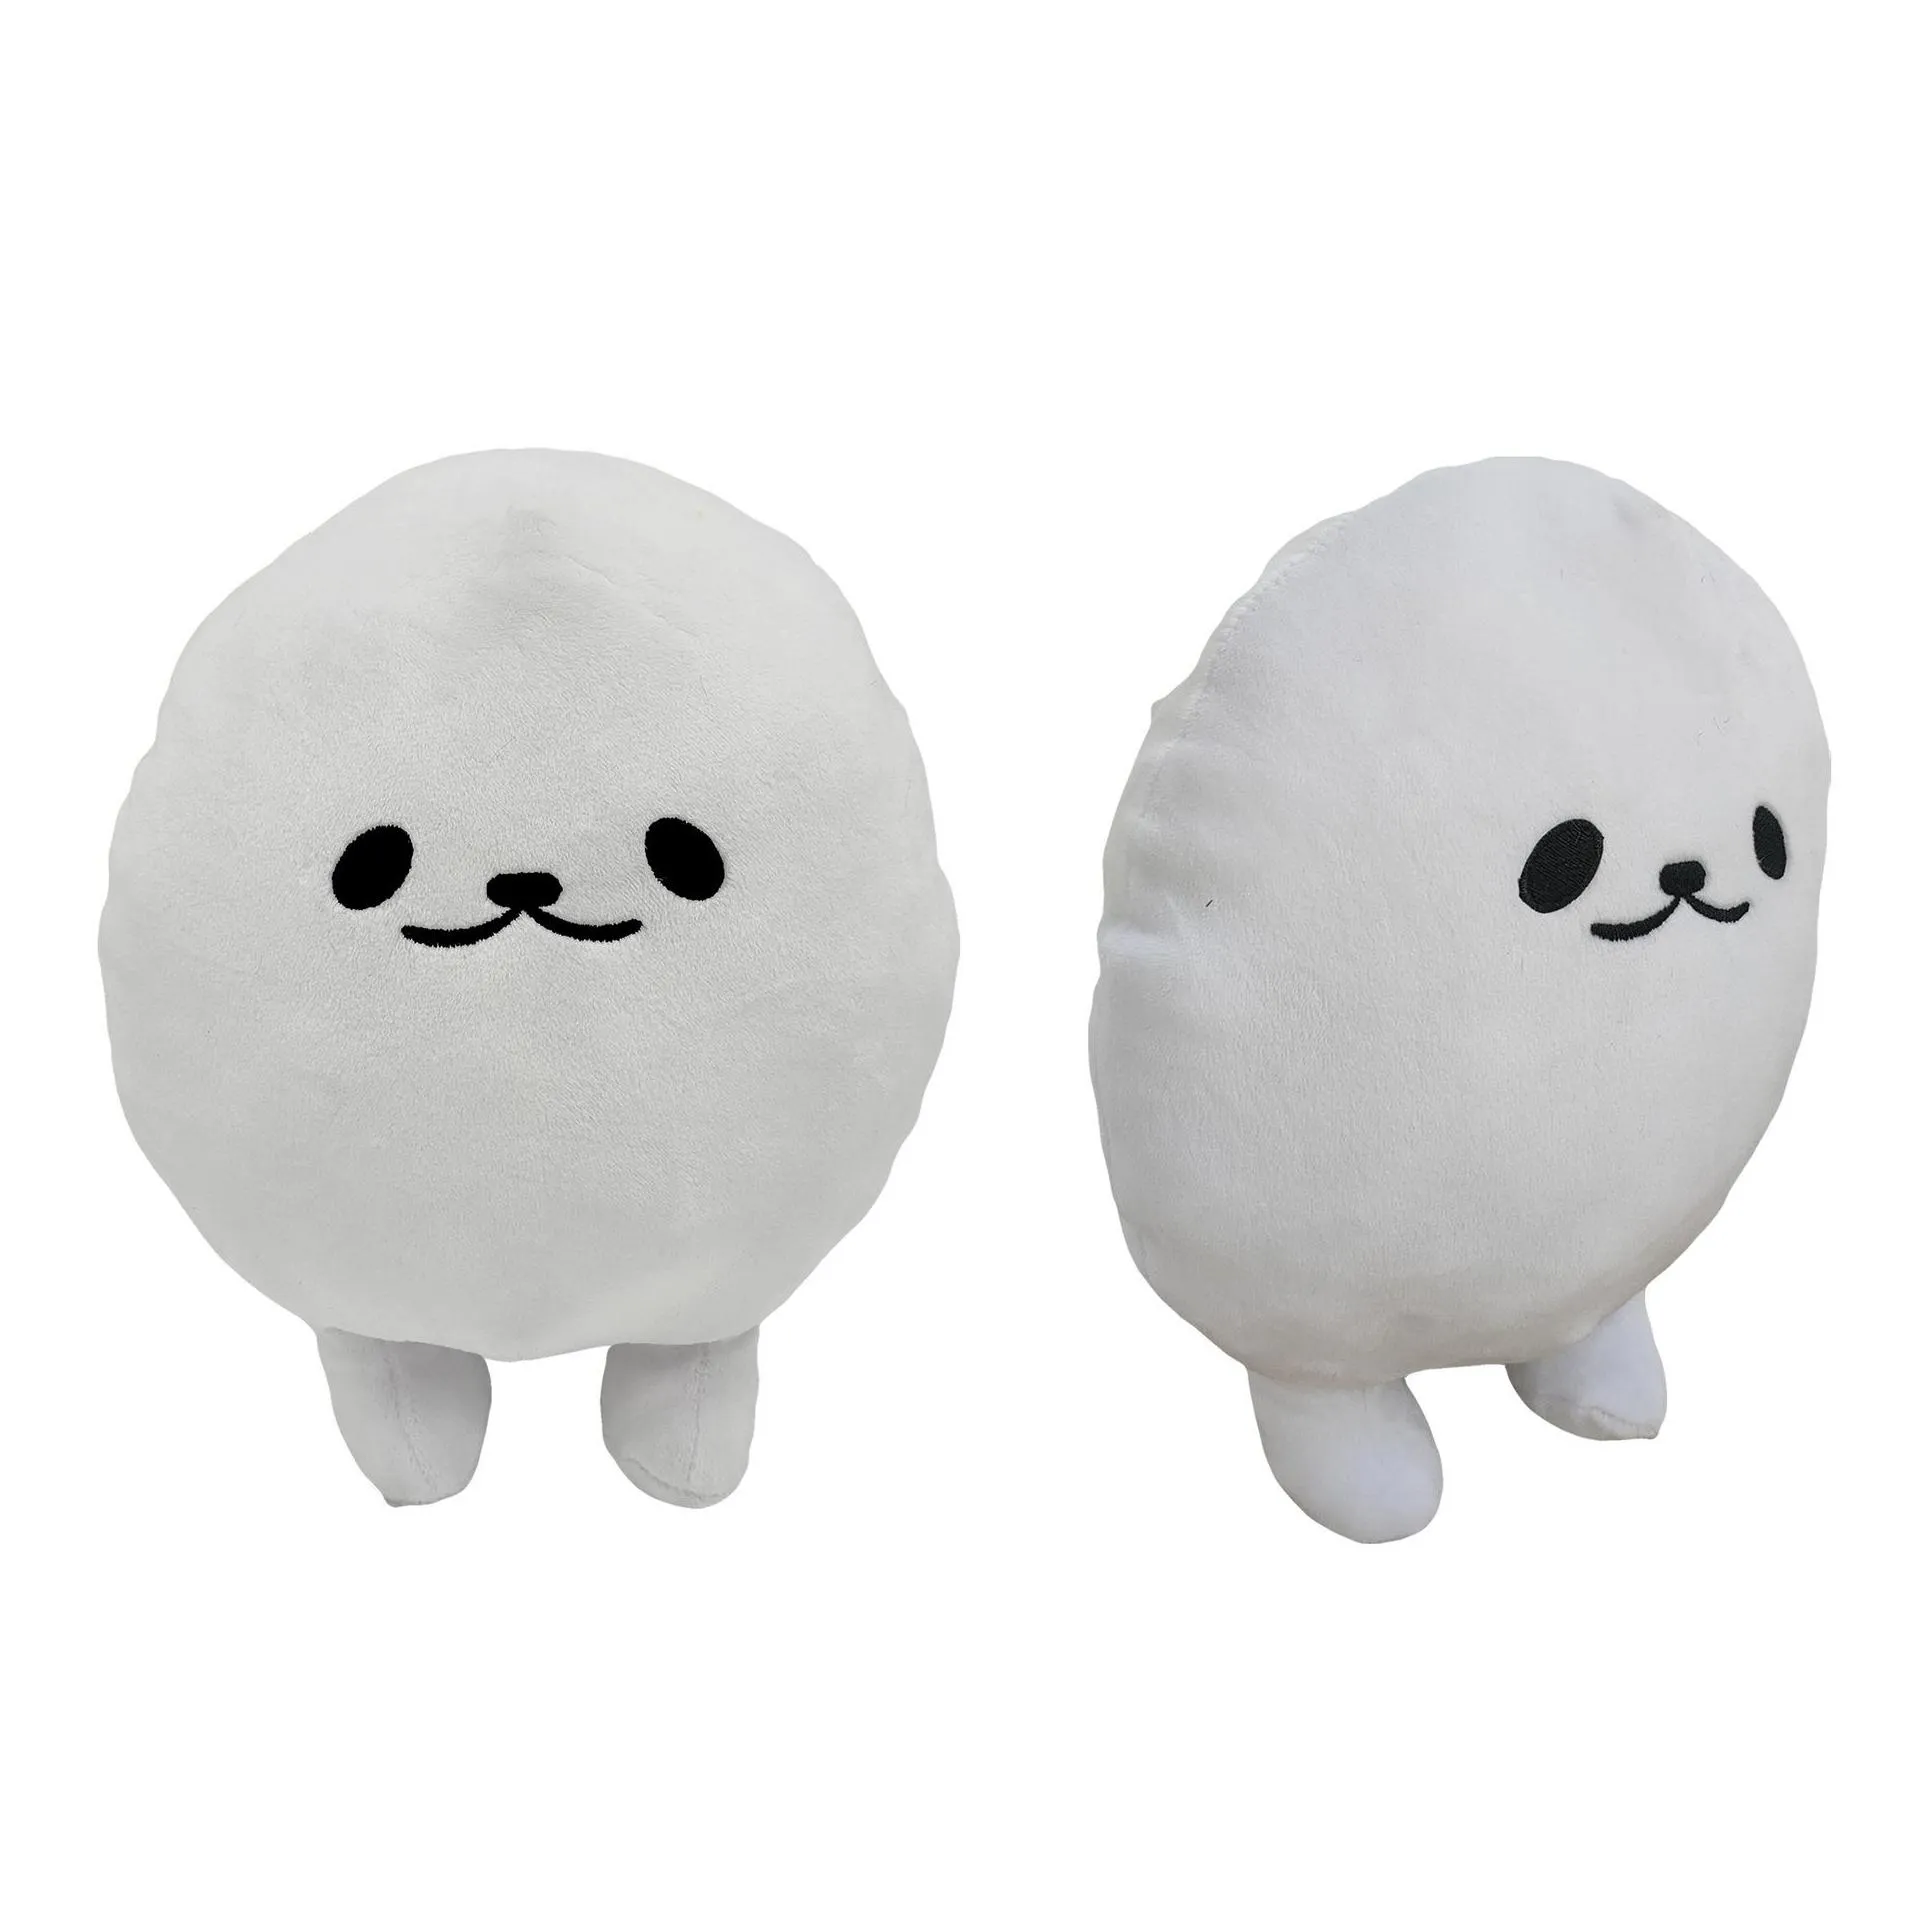 8 inch egg dog plush toy cute stuffed animal puppy toy figure pillow cushion gifts for boys and girls bed office home decor